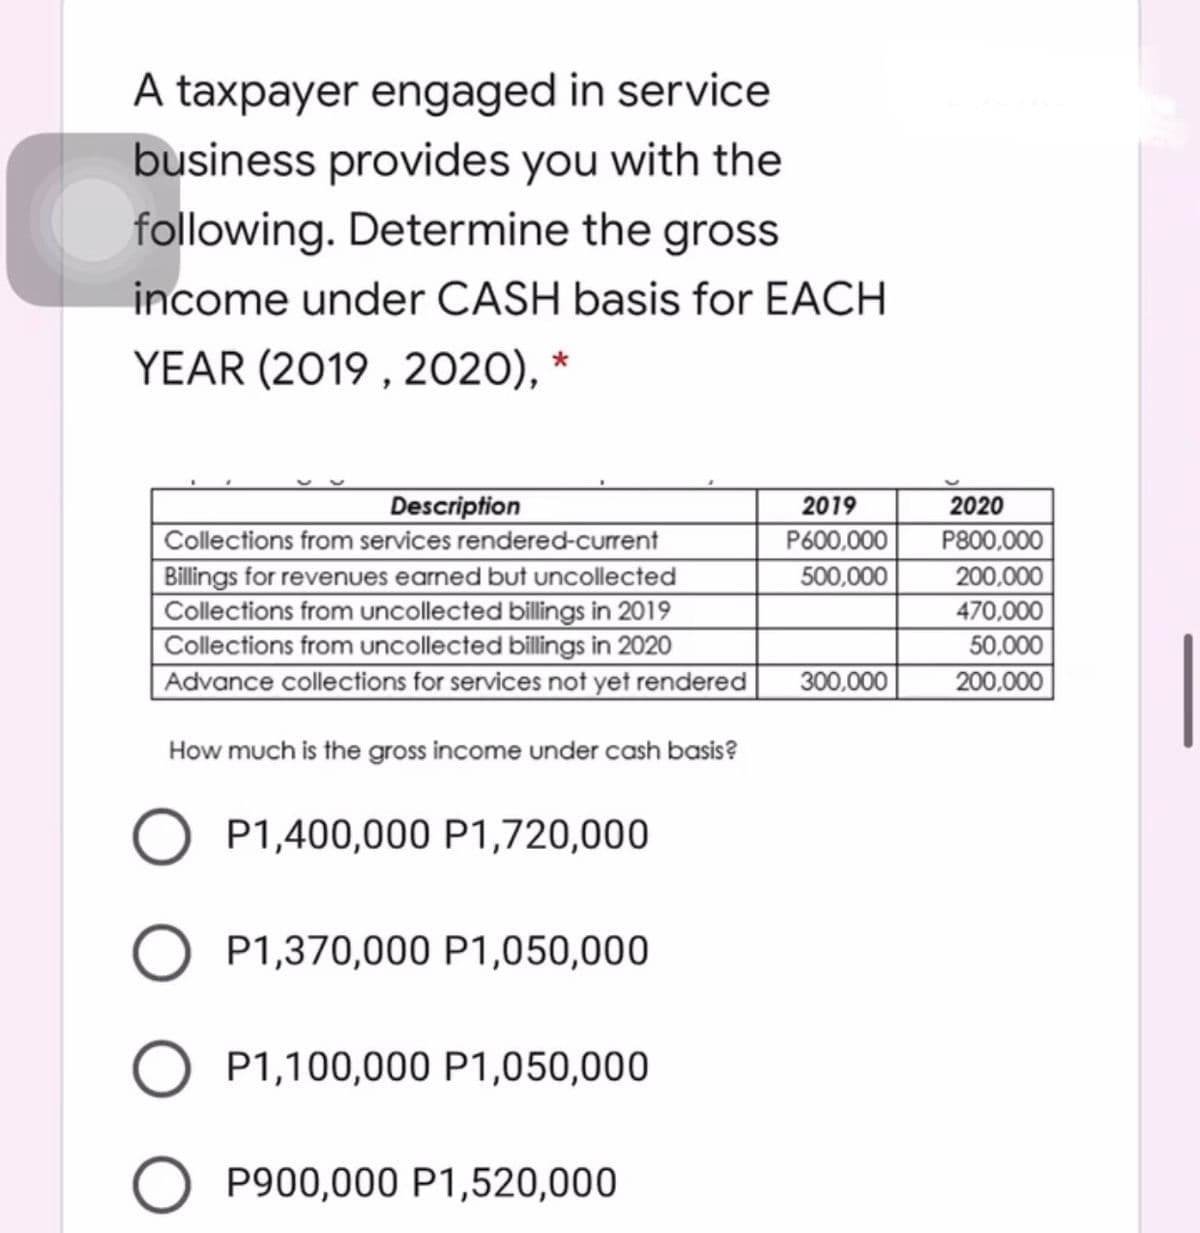 A taxpayer engaged in service
business provides you with the
following. Determine the gross
income under CASH basis for EACH
YEAR (2019 , 2020),
2019
Description
Collections from services rendered-current
2020
P600,000
P800,000
Billings for revenues earned but uncollected
Collections from uncollected billings in 2019
Collections from uncollected billings in 2020
Advance collections for services not yet rendered
200,000
470,000
50,000
200,000
500,000
300,000
How much is the gross income under cash basis?
O P1,400,000 P1,720,000
P1,370,000 P1,050,000
P1,100,000 P1,050,000
O P900,000 P1,520,000
